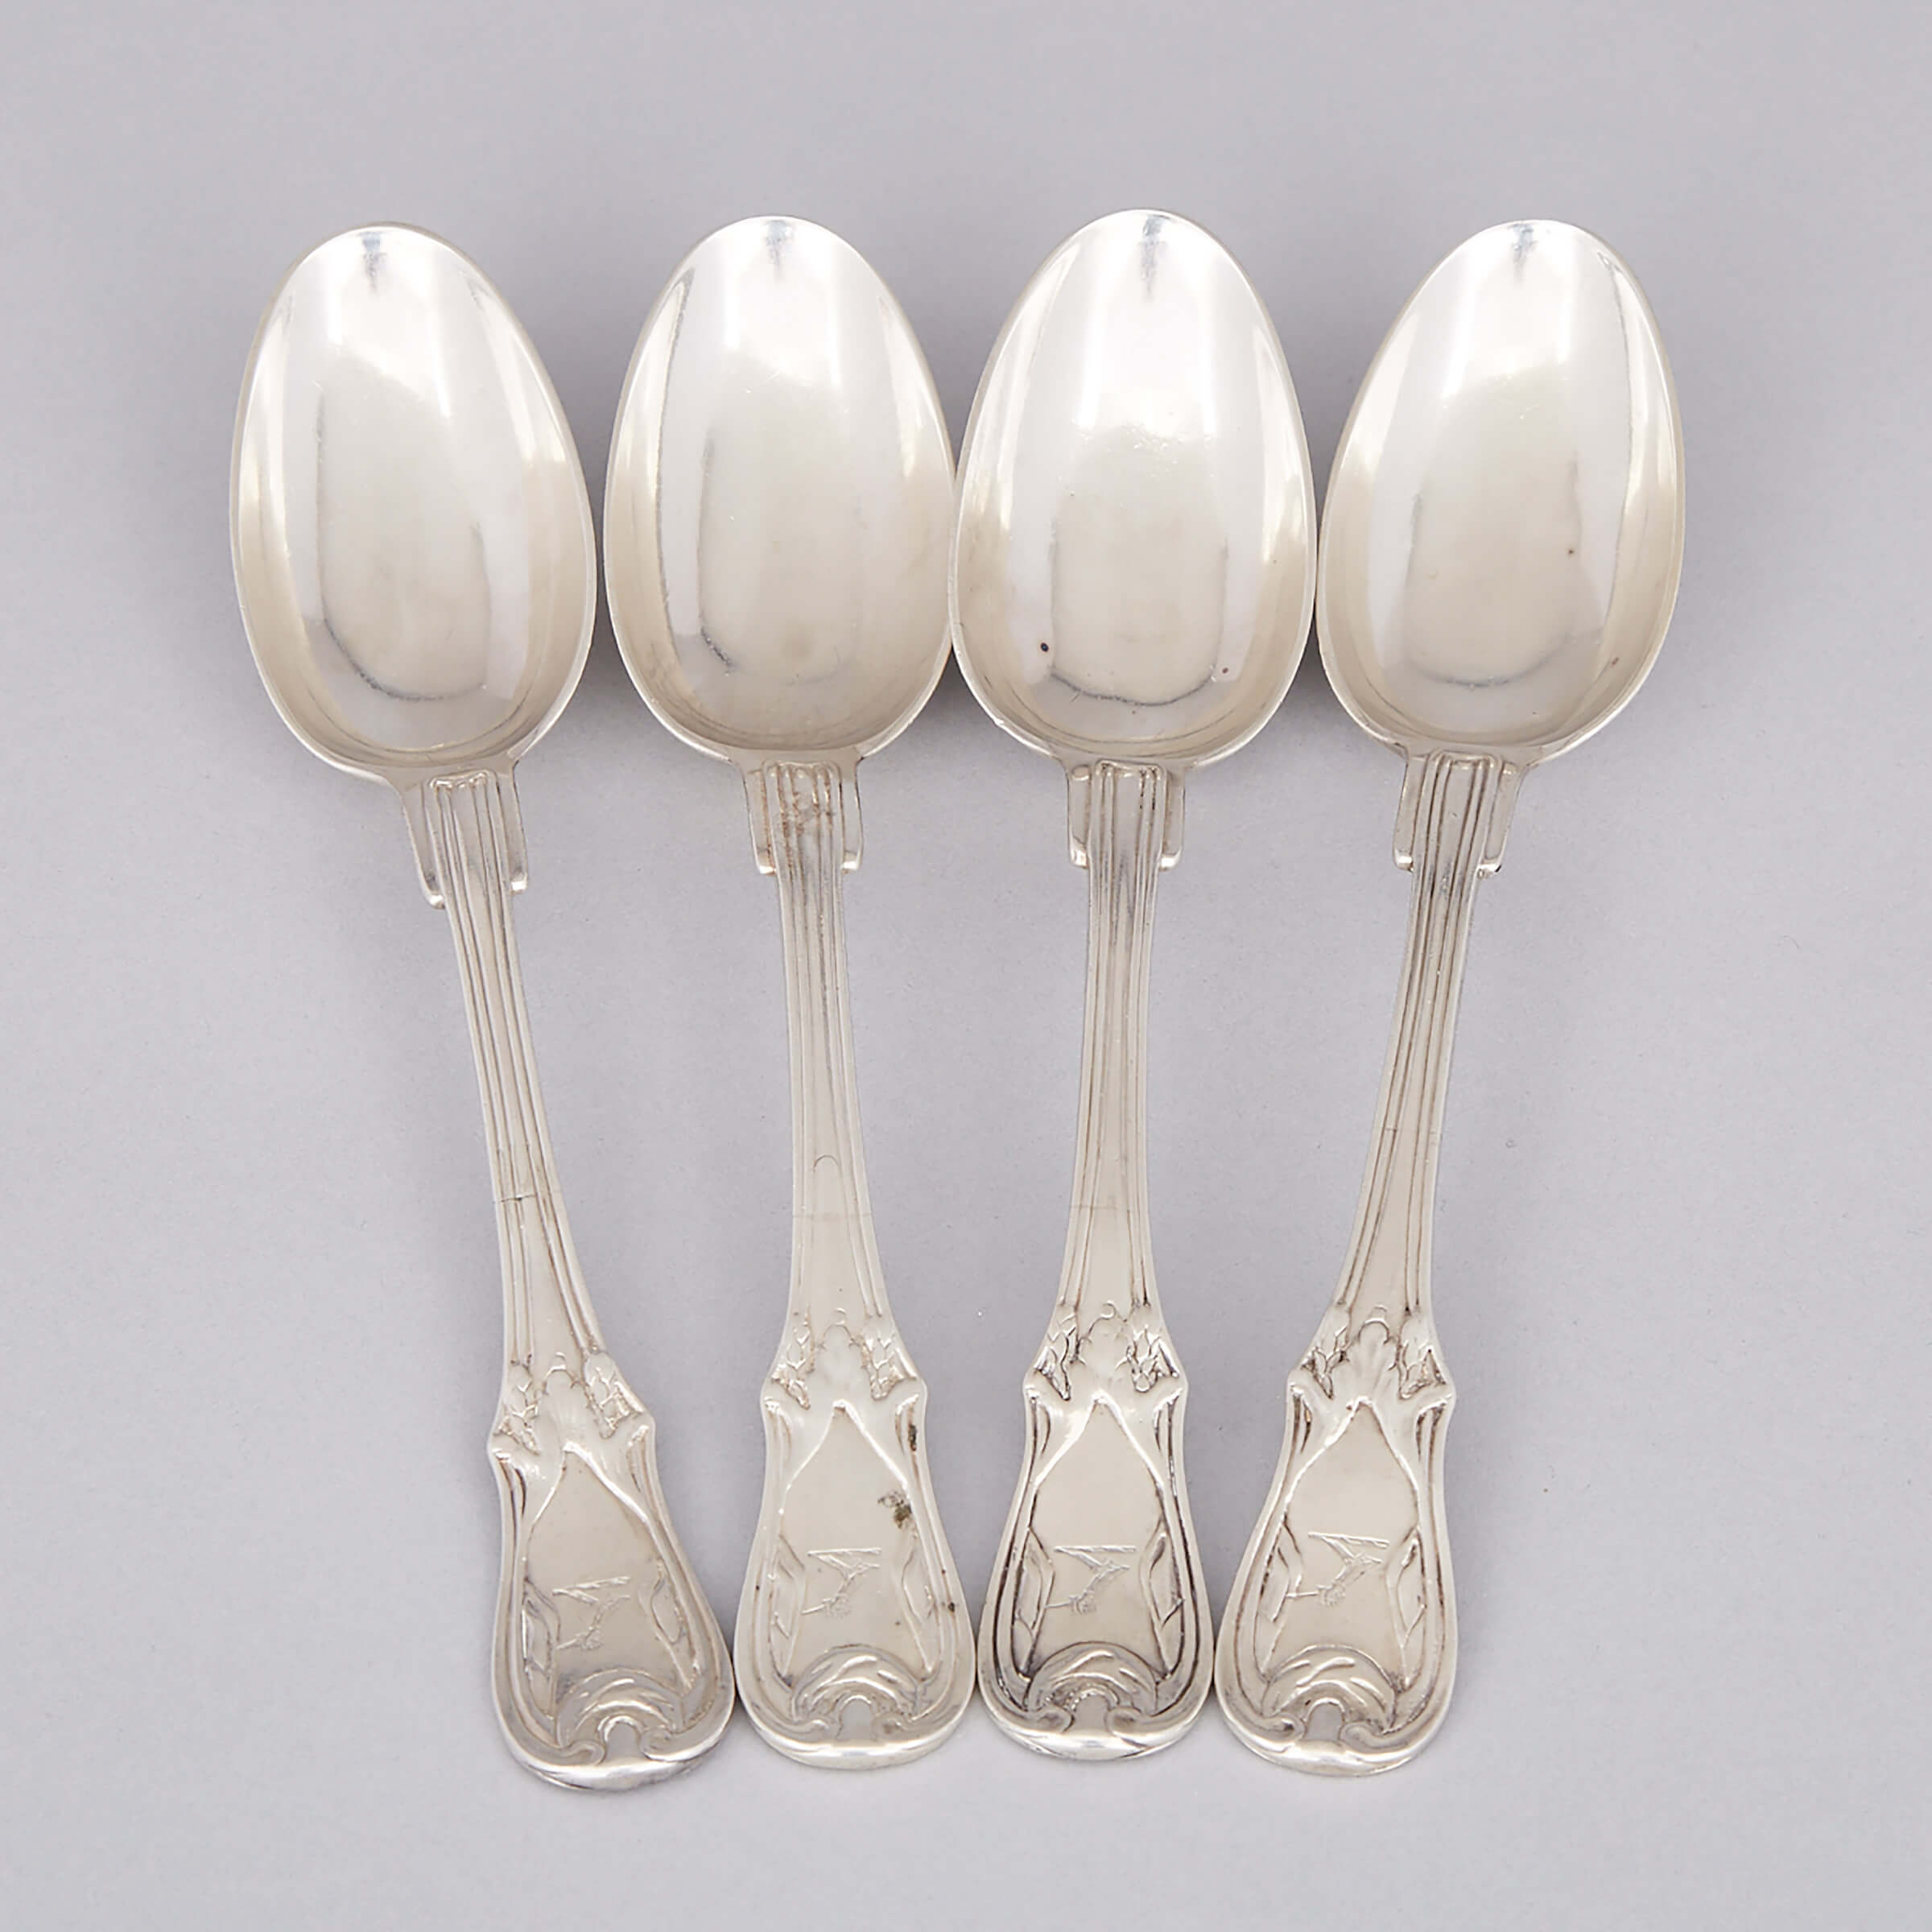 Four Belgian Silver Table Spoons, mid-18th century